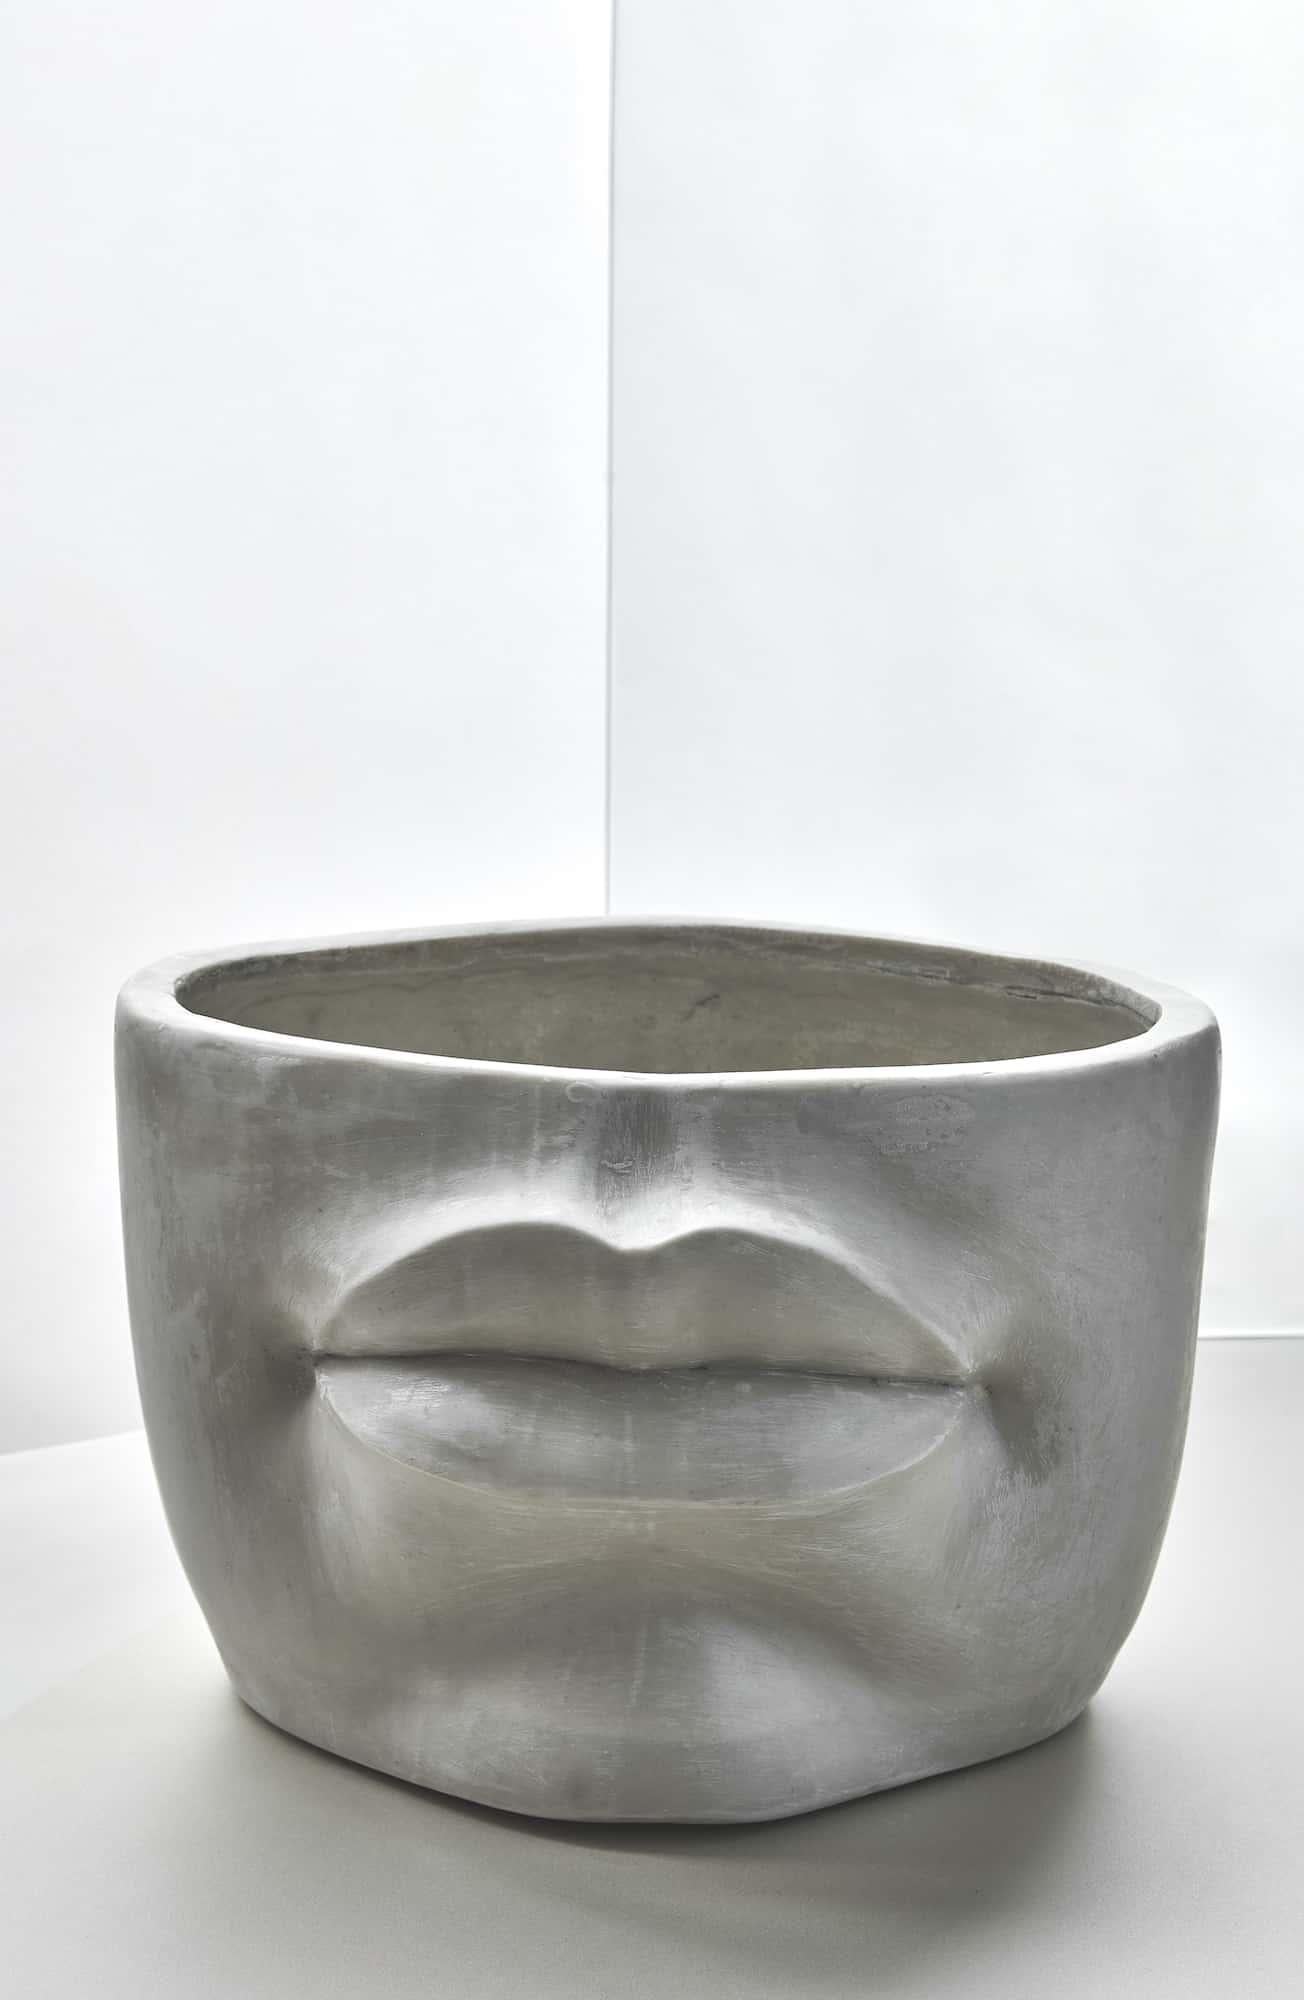 La Bocca bowl by Marcela Cure.
Dimensions: W 32 x D 22 x H 26 cm.
Materials: resin and stone composite.

Our La Bocca bowl is inspired by the fascinating and provocative figure of human lips.
This collection is inspired by the seducing form of